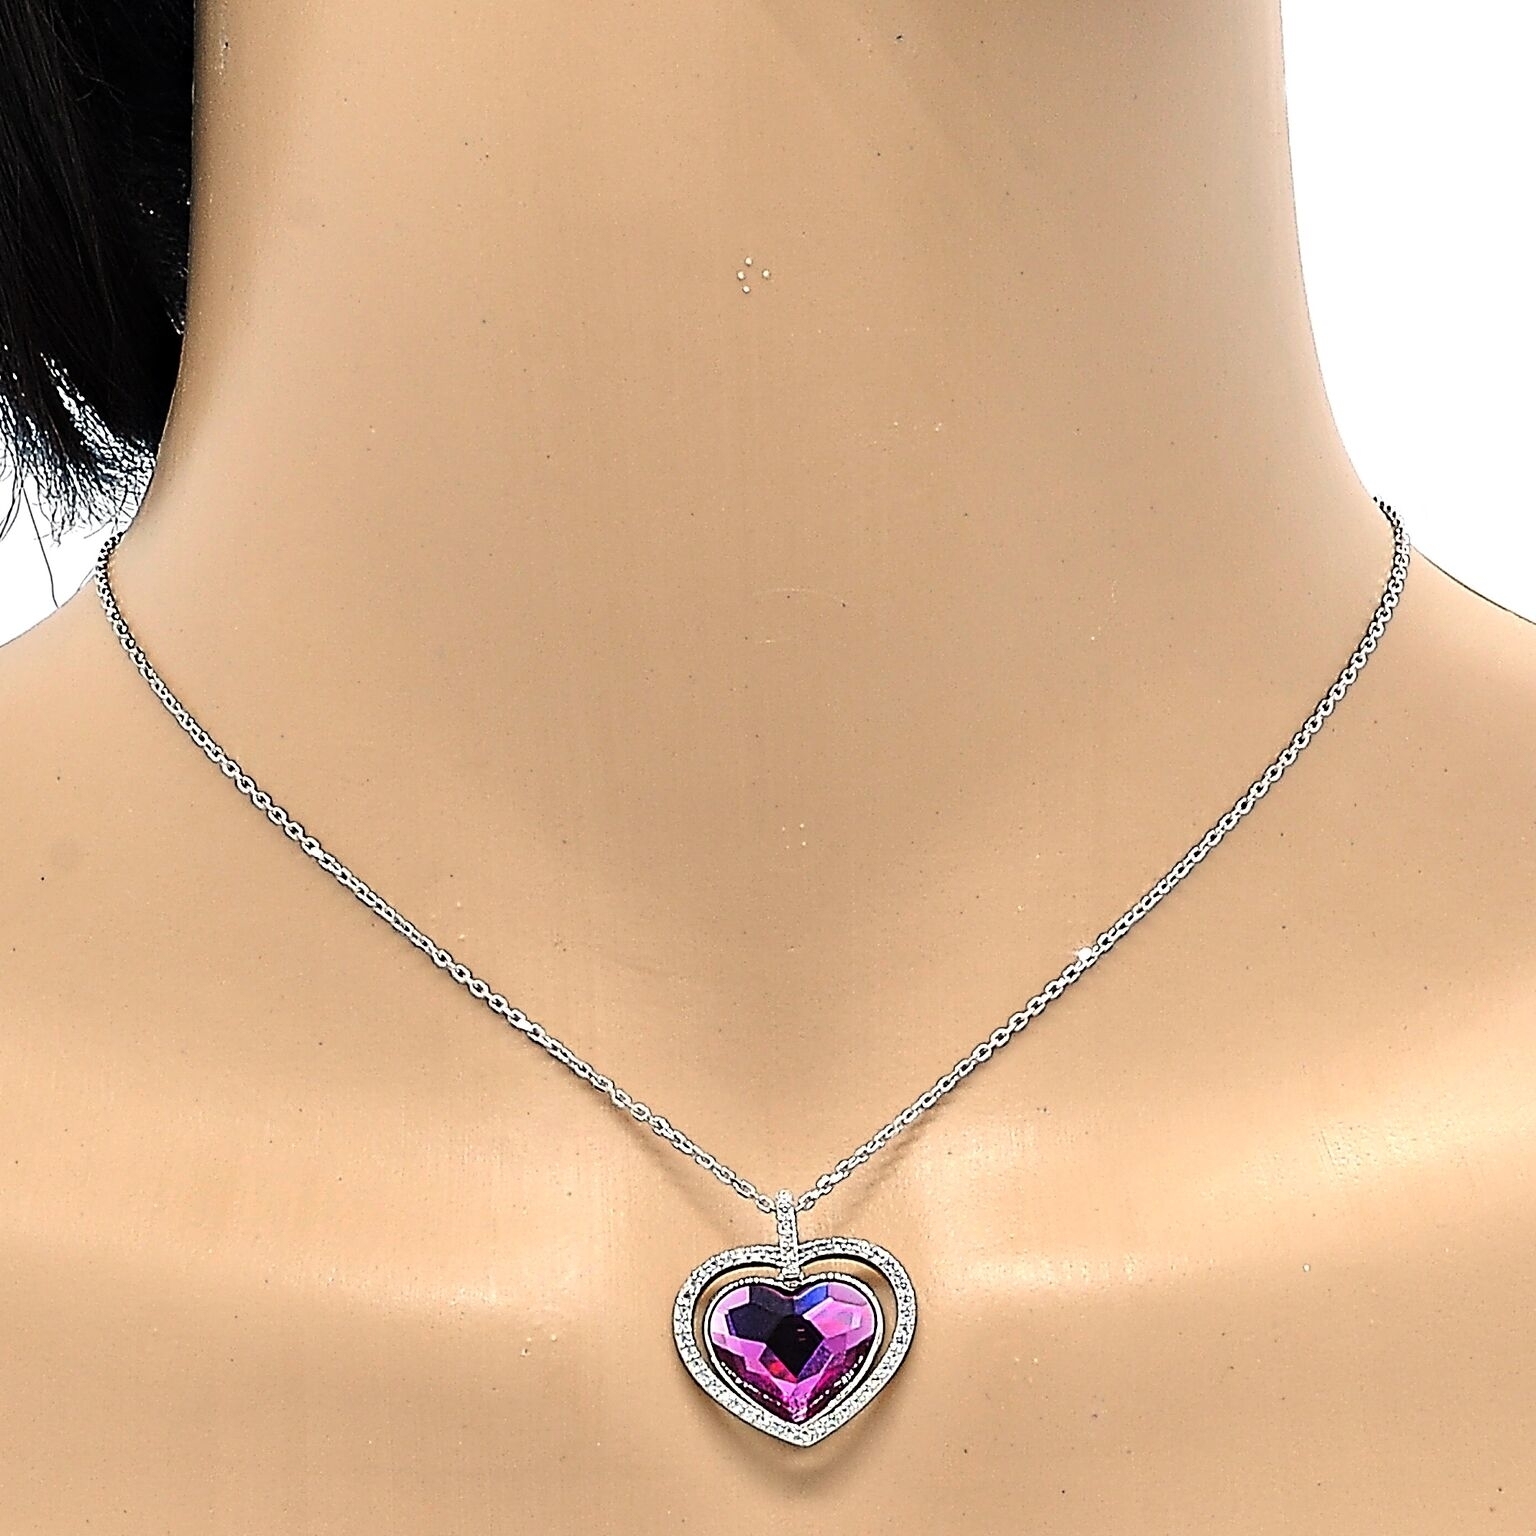 Rhodium Filled High Polish Finsh Fancy Necklace, Heart Design, With Crystals And Micro Pave, Rhodium Tone